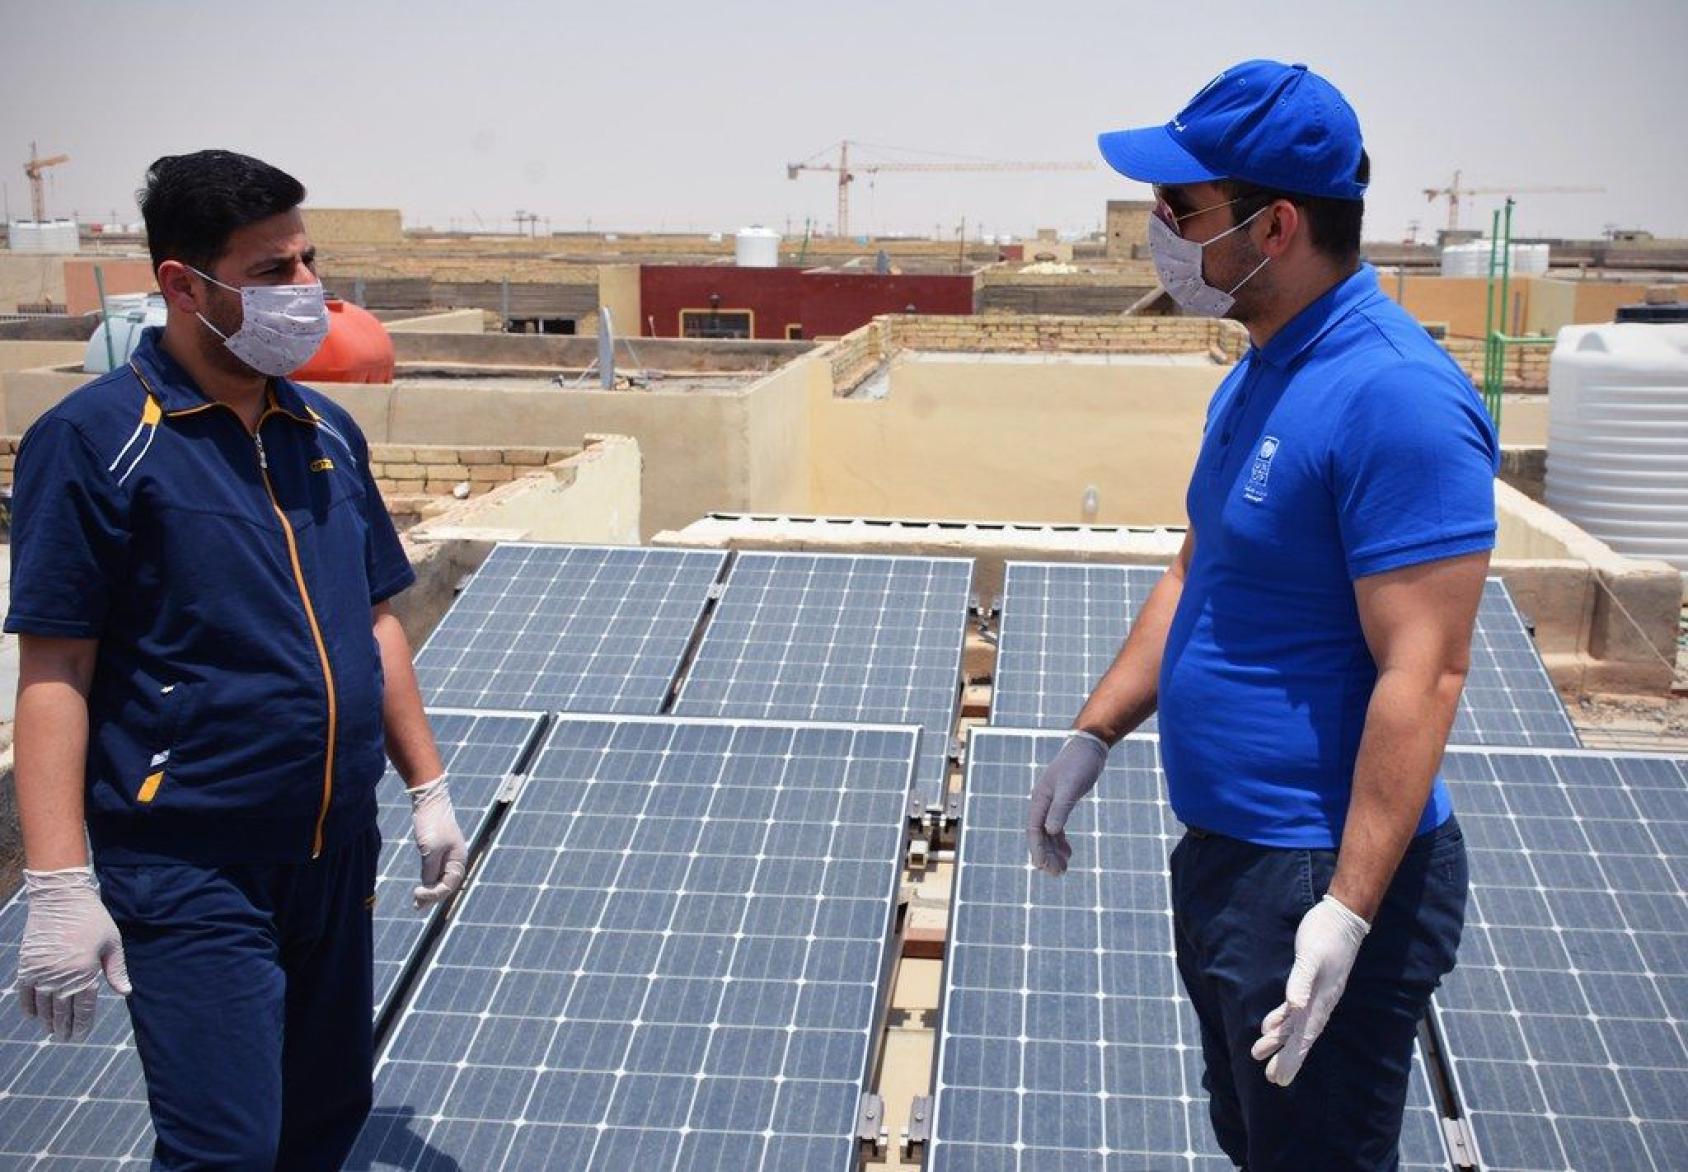 Two men in face masks and gloves stand near solar panels on a sunny day.